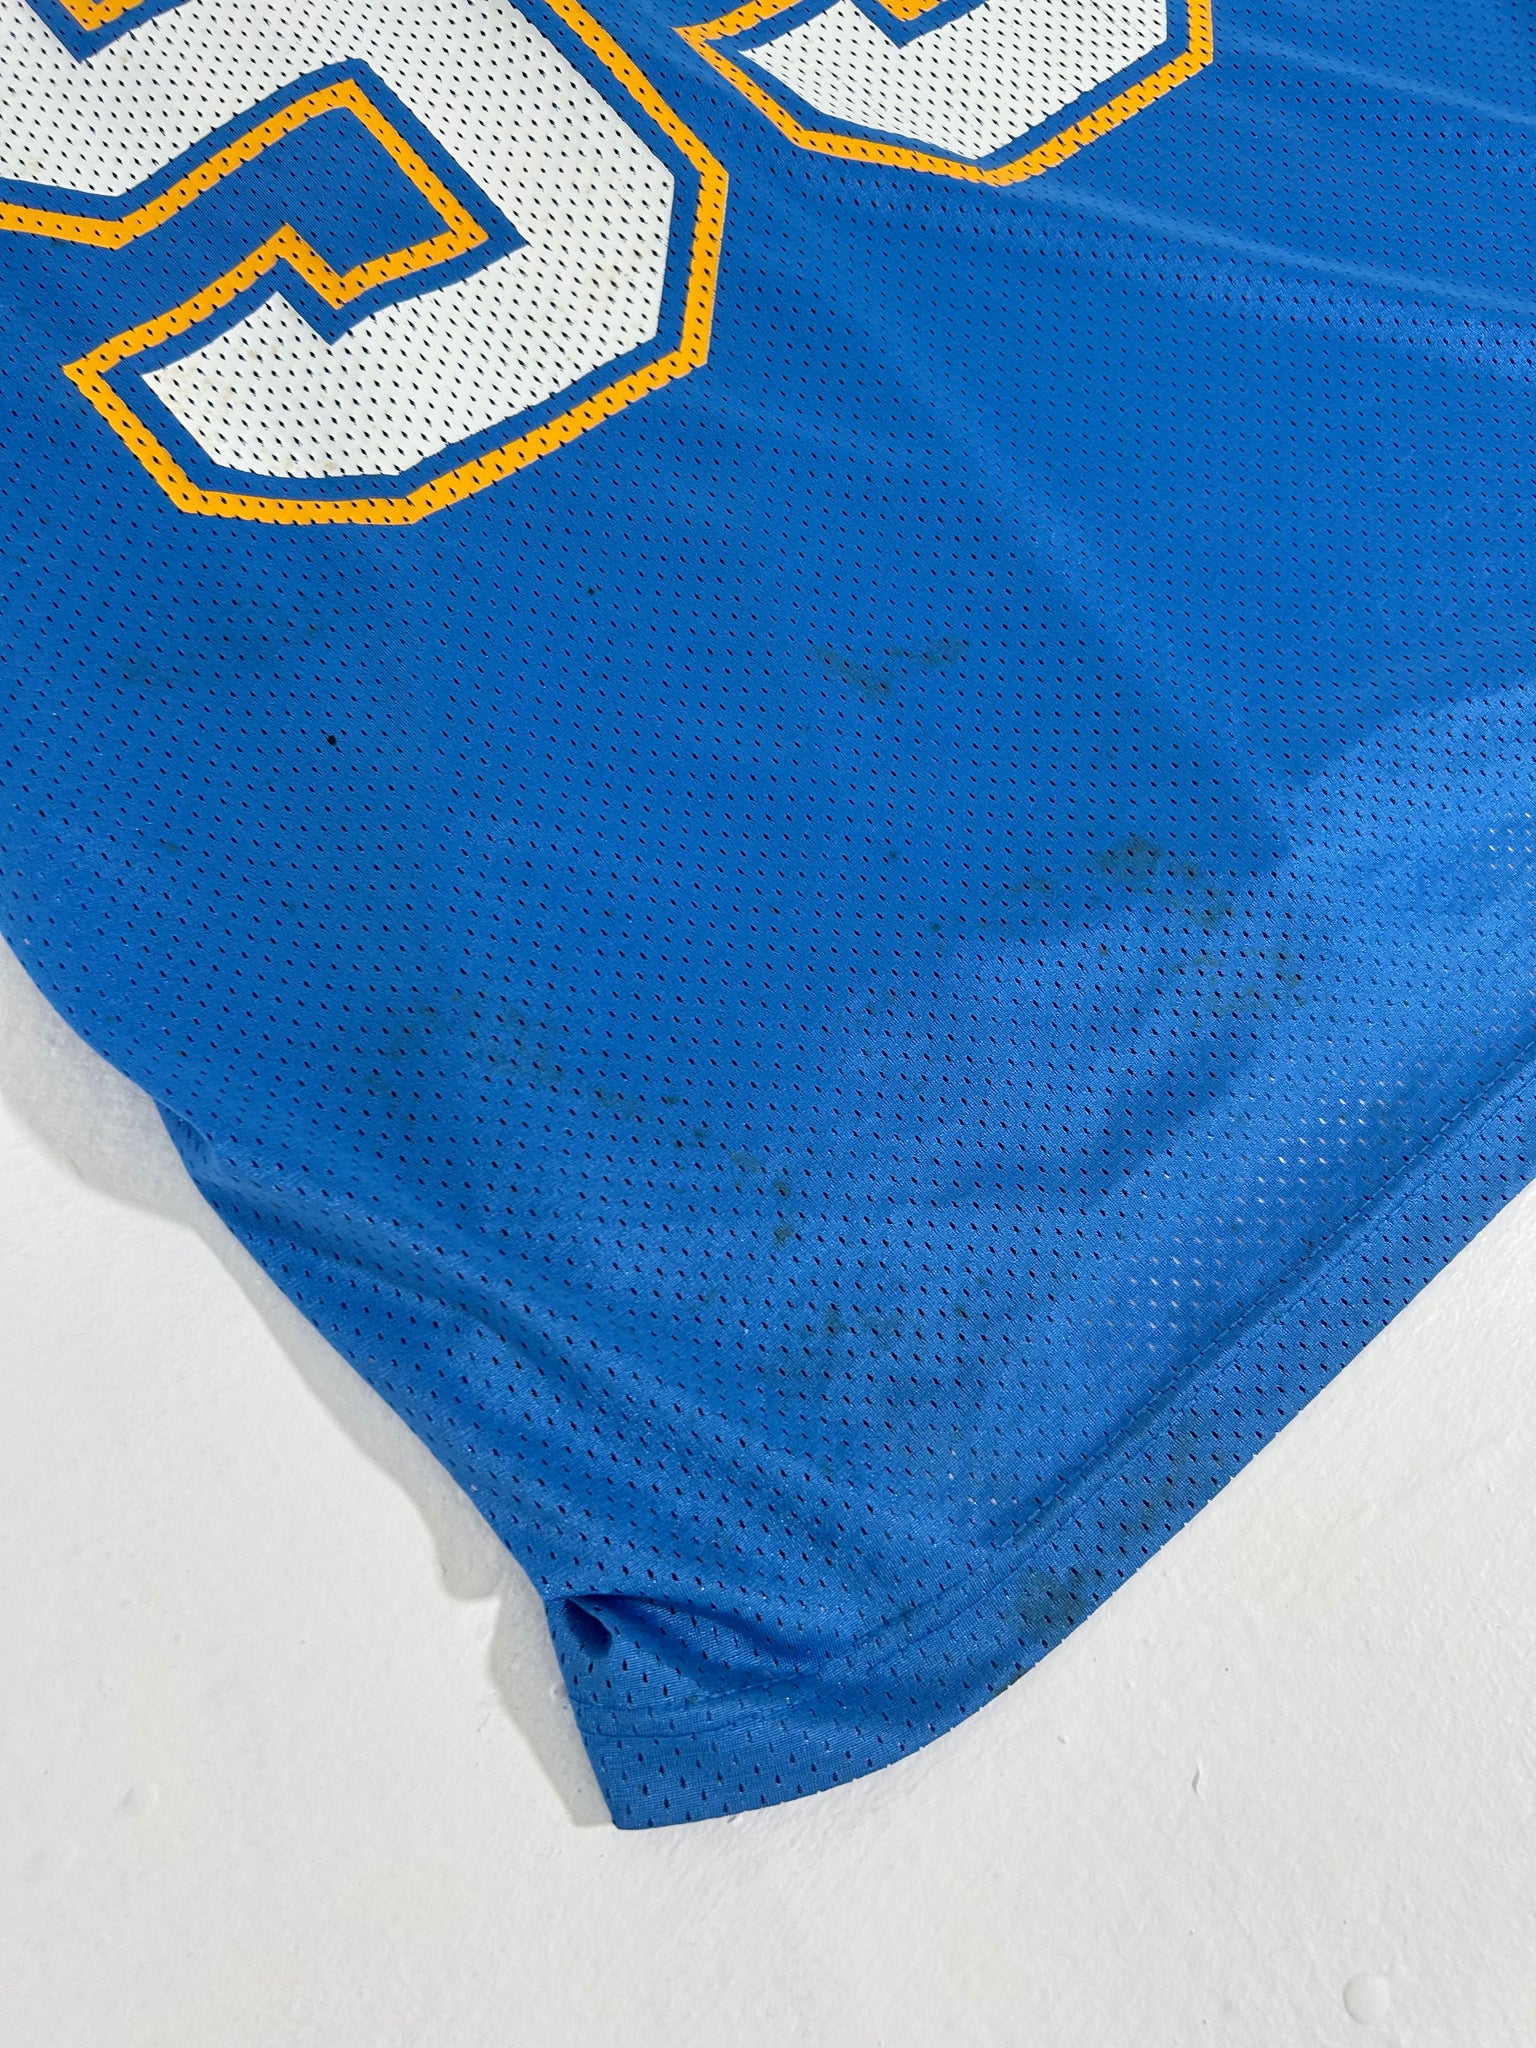 Vintage San Diego Chargers 40th Anniversary Football Jersey Authentic Sewn